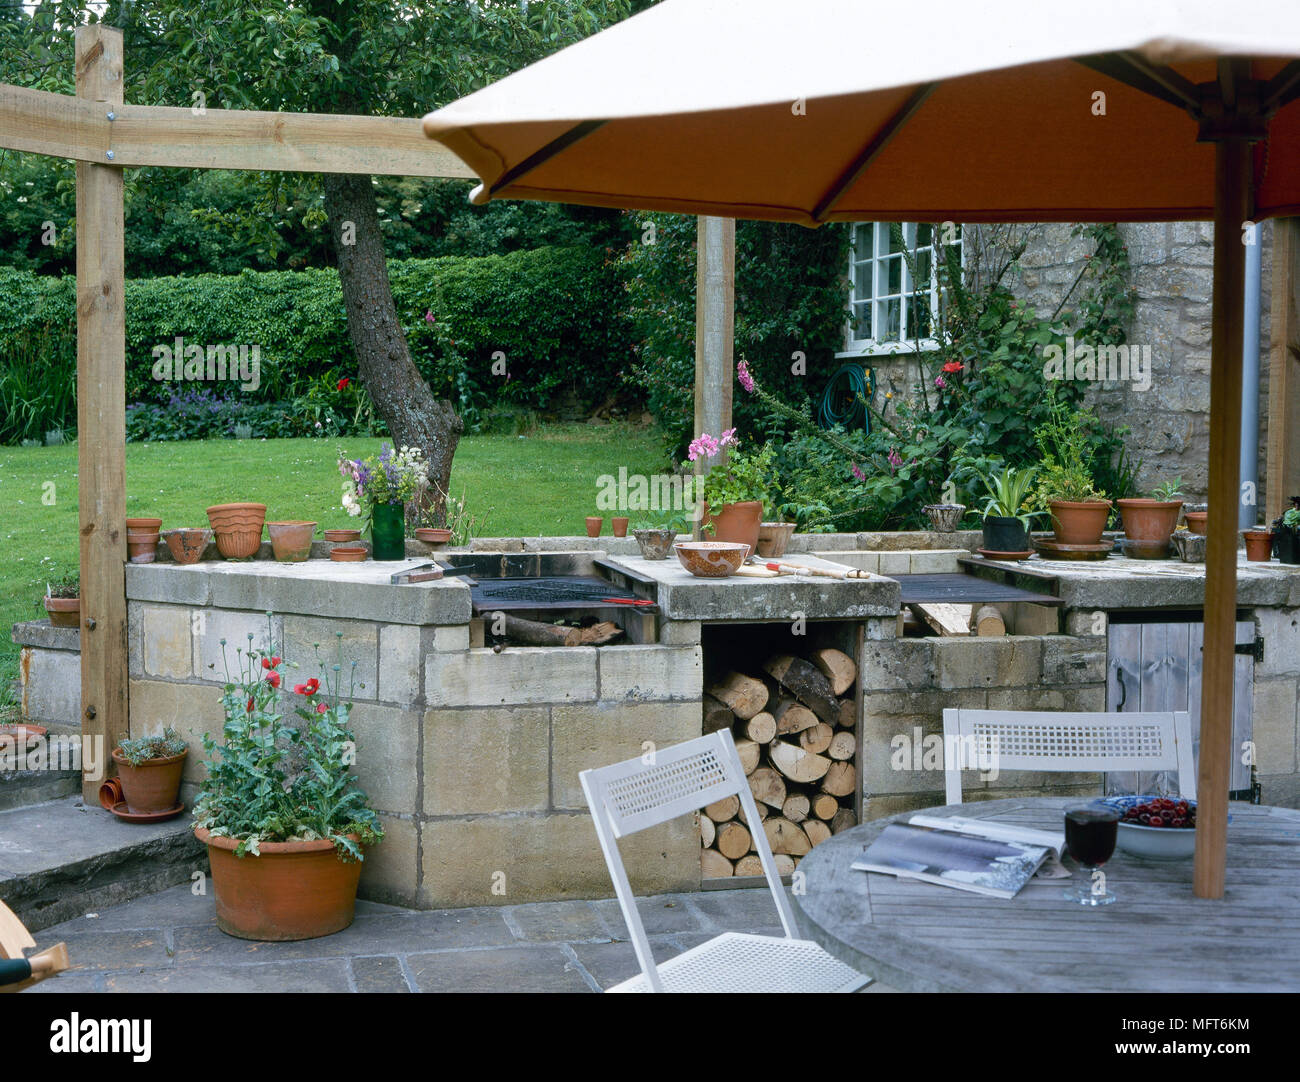 Backyard with a brick outdoor barbecue, flagstone patio, and a table and chairs under an umbrella. Stock Photo